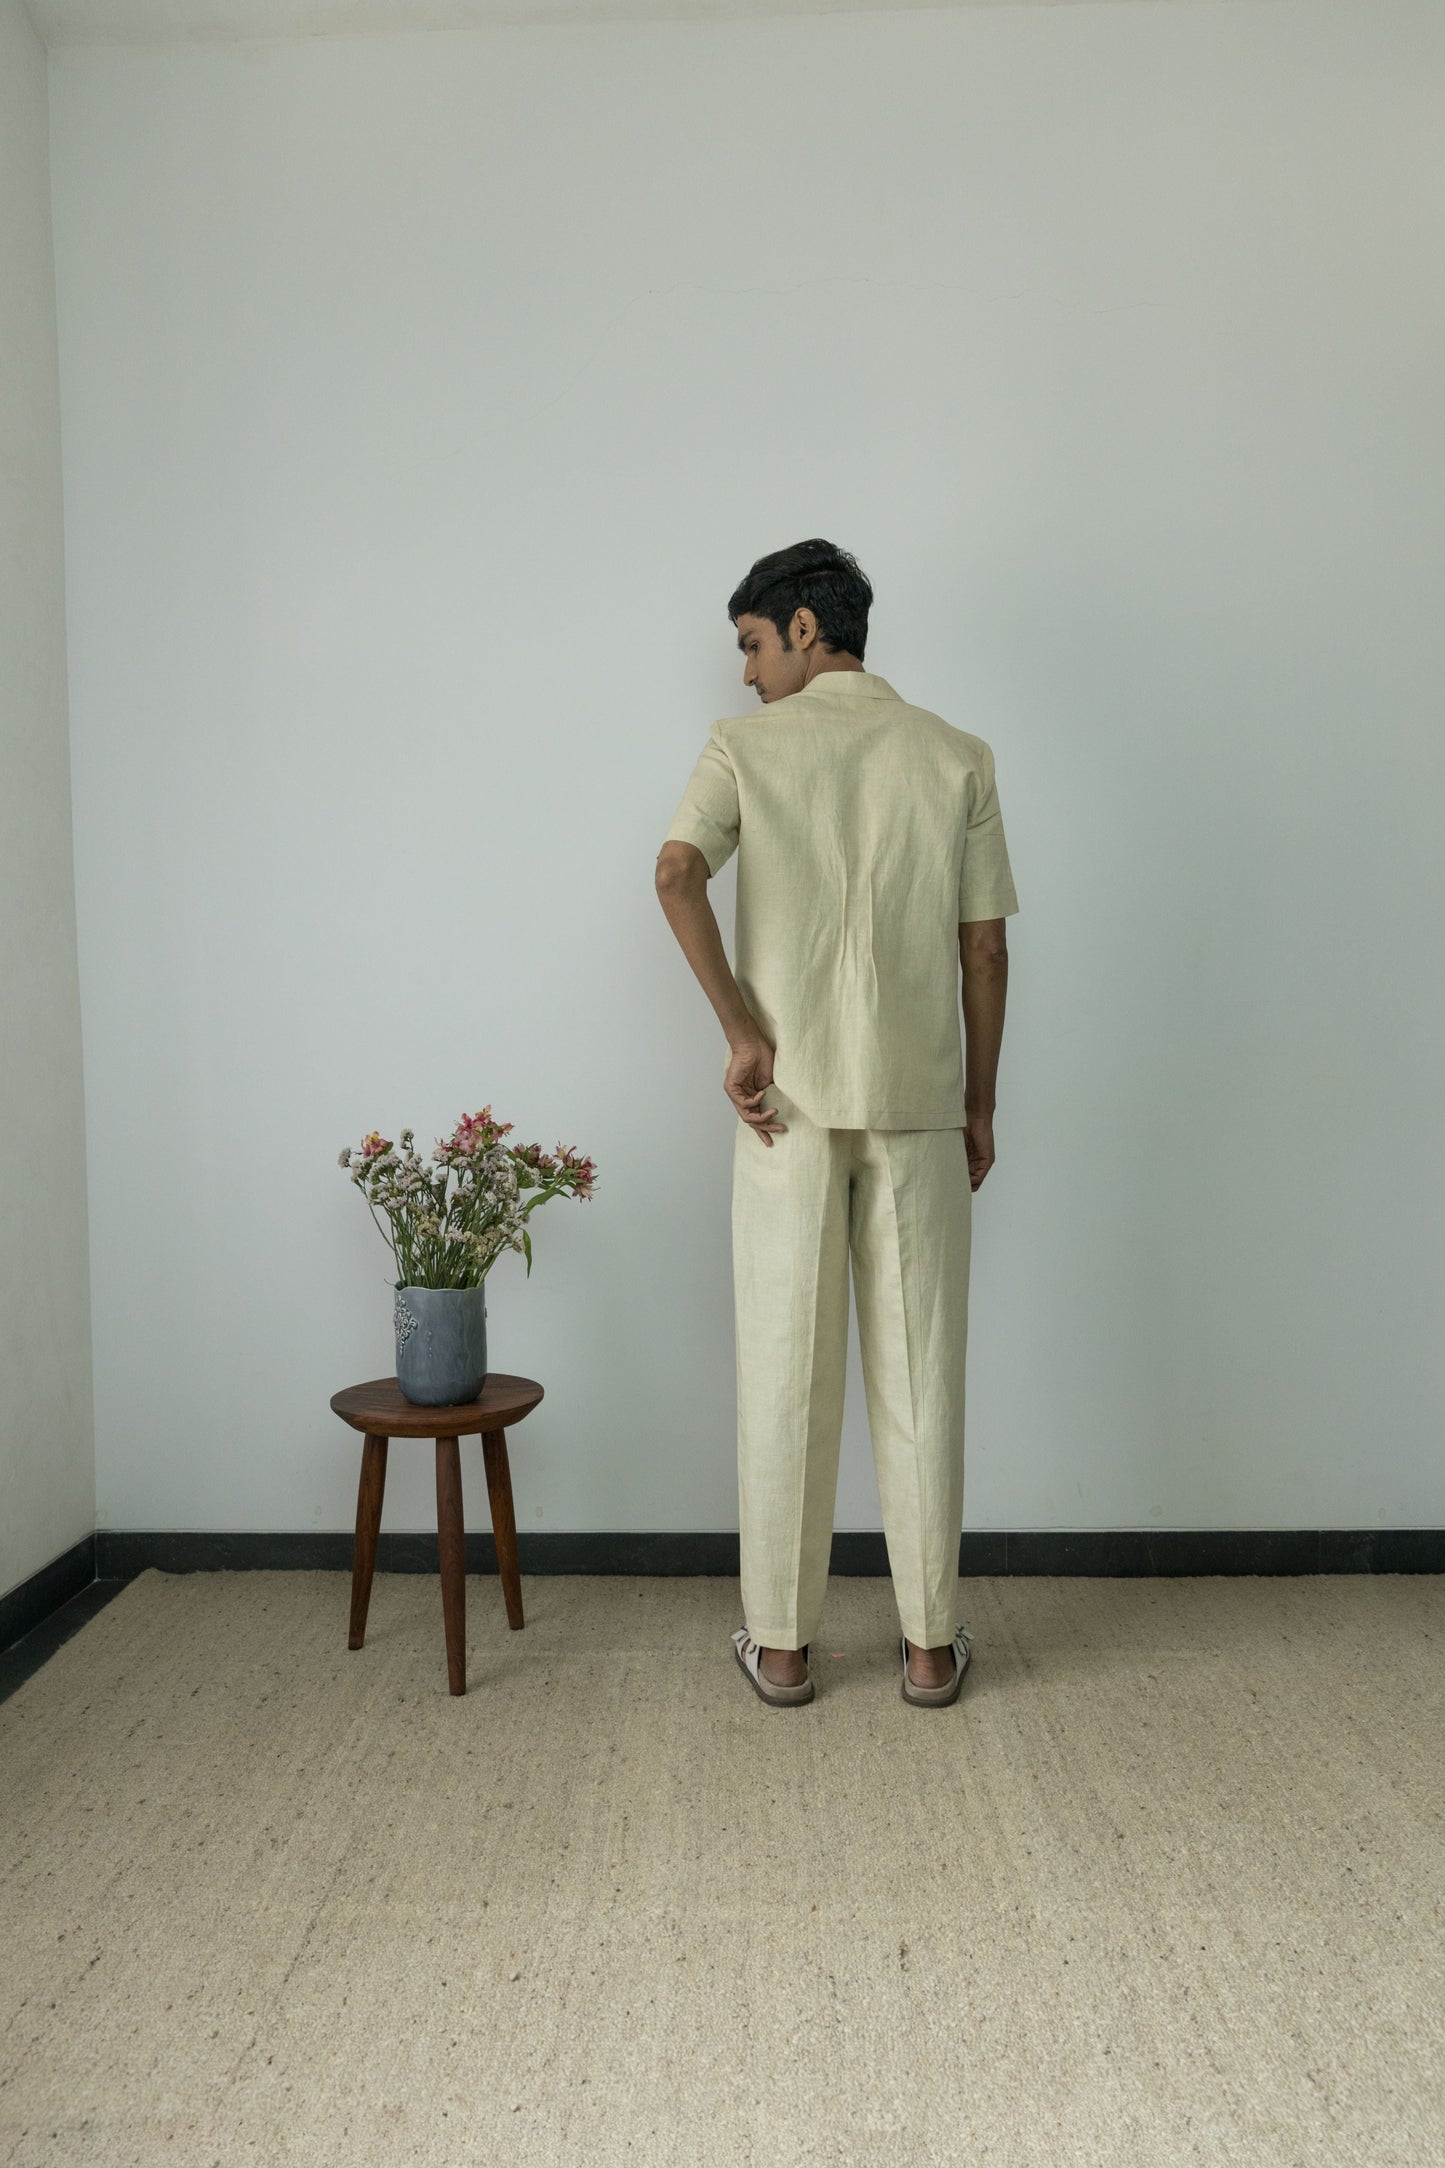 Beige Casual Pants at Kamakhyaa by Anushé Pirani. This item is Beige, Casual Wear, Cotton, Cotton Hemp, For Him, Handwoven, Hemp, Mens Bottom, Menswear, Pants, Relaxed Fit, Shibumi Collection, Solids